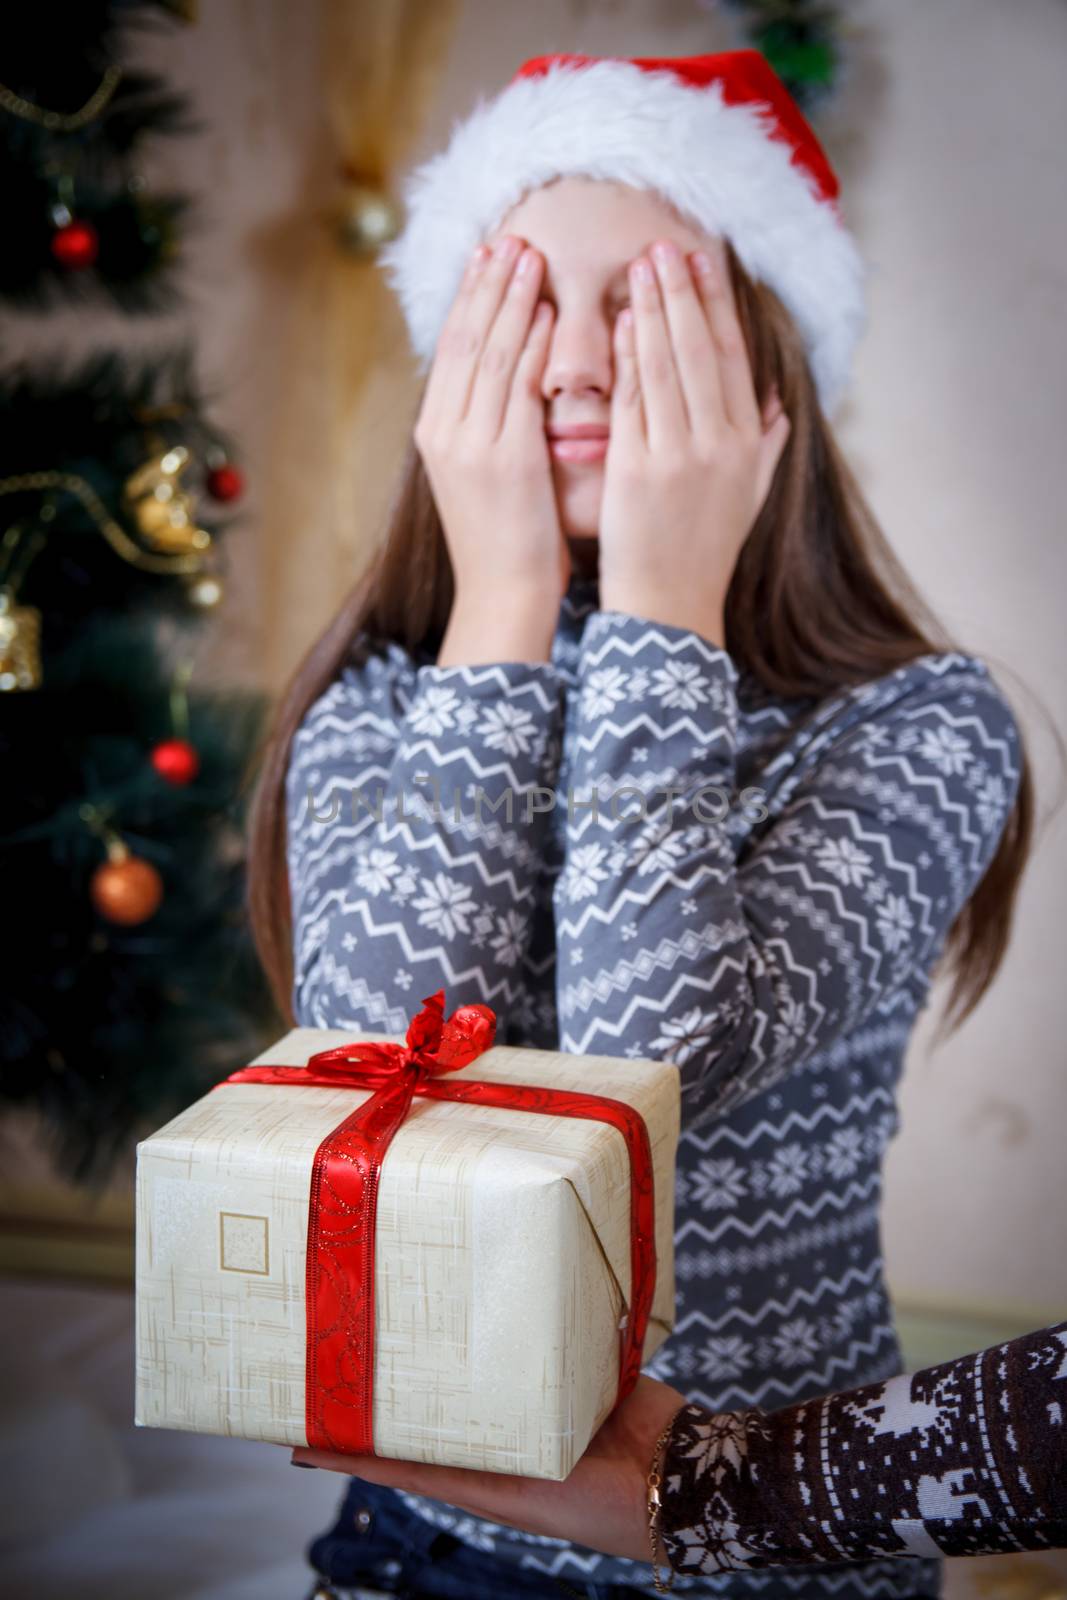 Girl closed eyes with hands in anticipation of Christmas gift, focus on gift